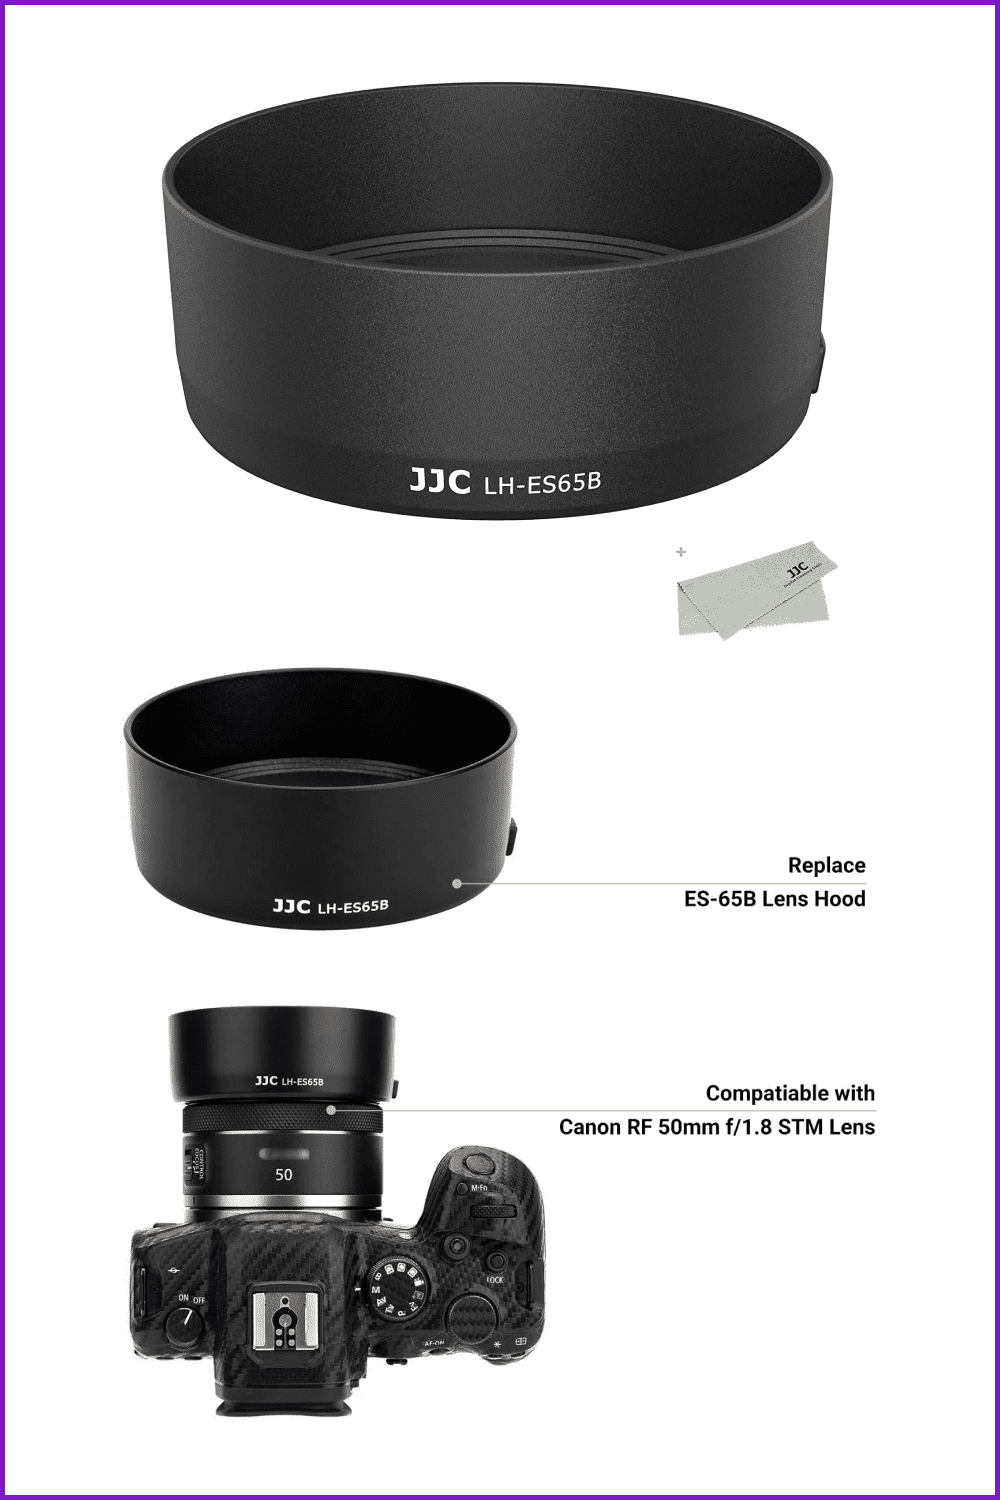 Photo of the camera and Lens Hood for Canon RF.